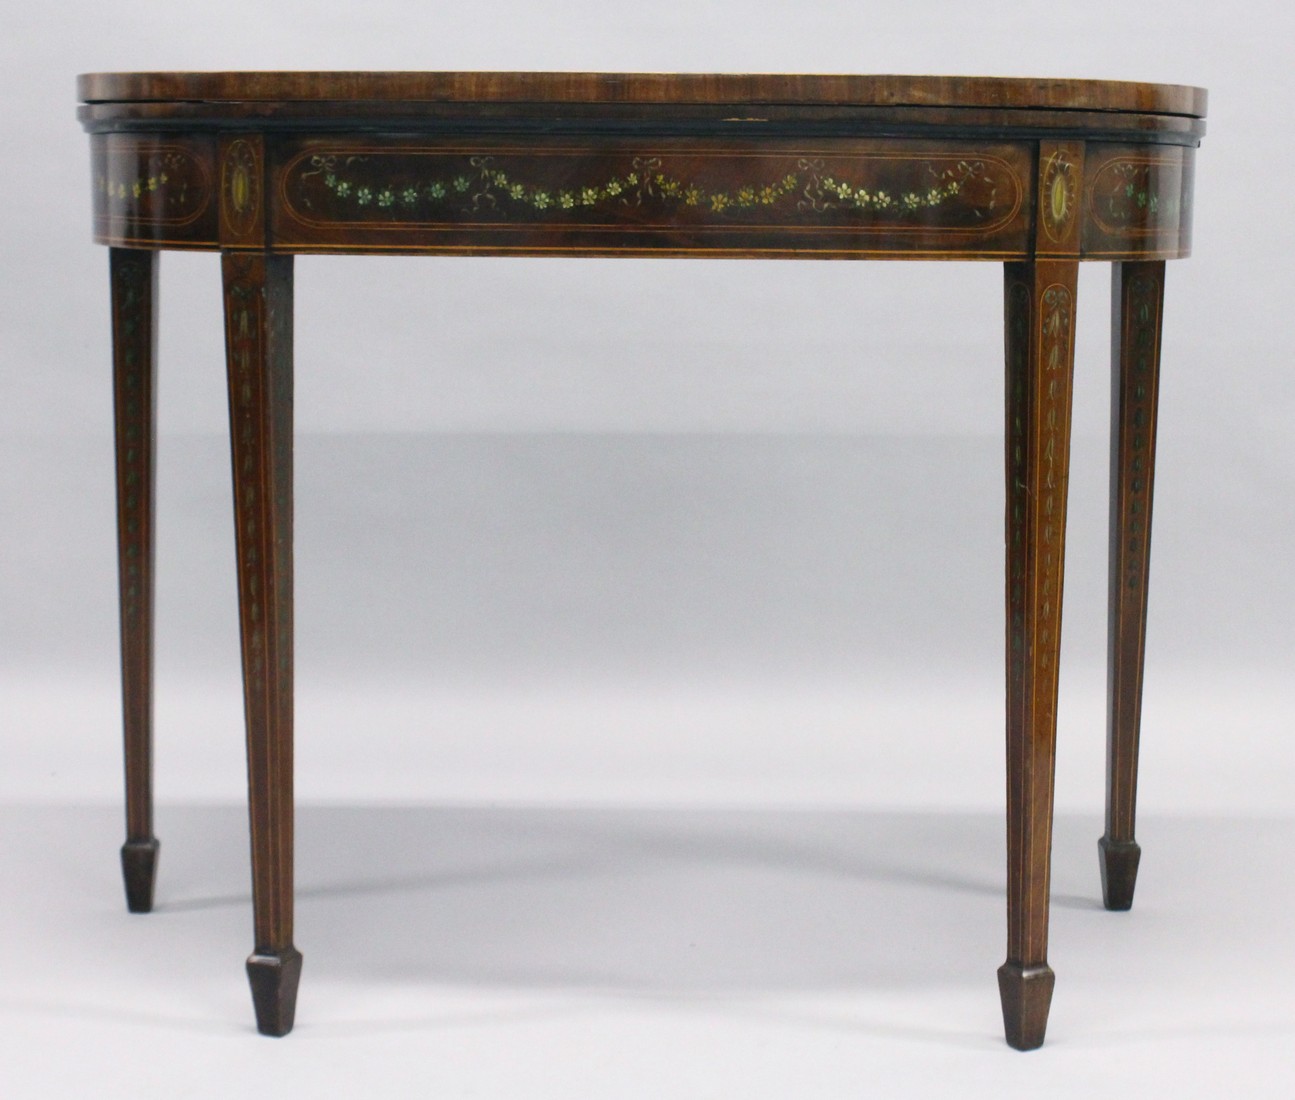 A GEORGIAN SHERATON REVIVAL MAHOGANY CARD TABLE painted with garlands and flowers with banded top - Image 2 of 8